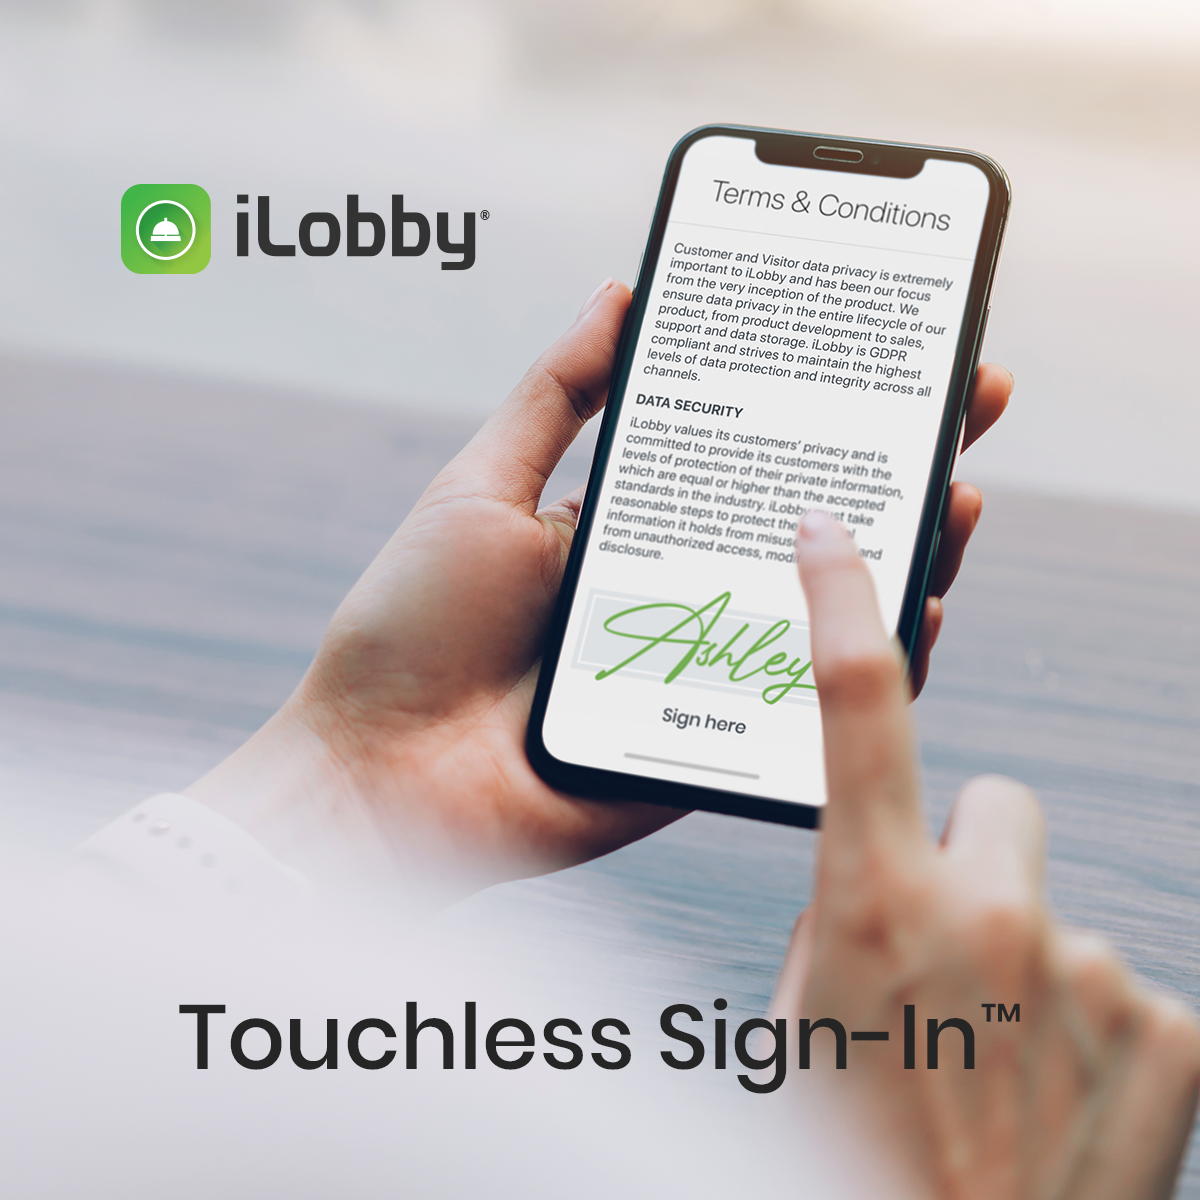 Visitor Management Platform Ilobby® Launches New Touchless Sign In™ To